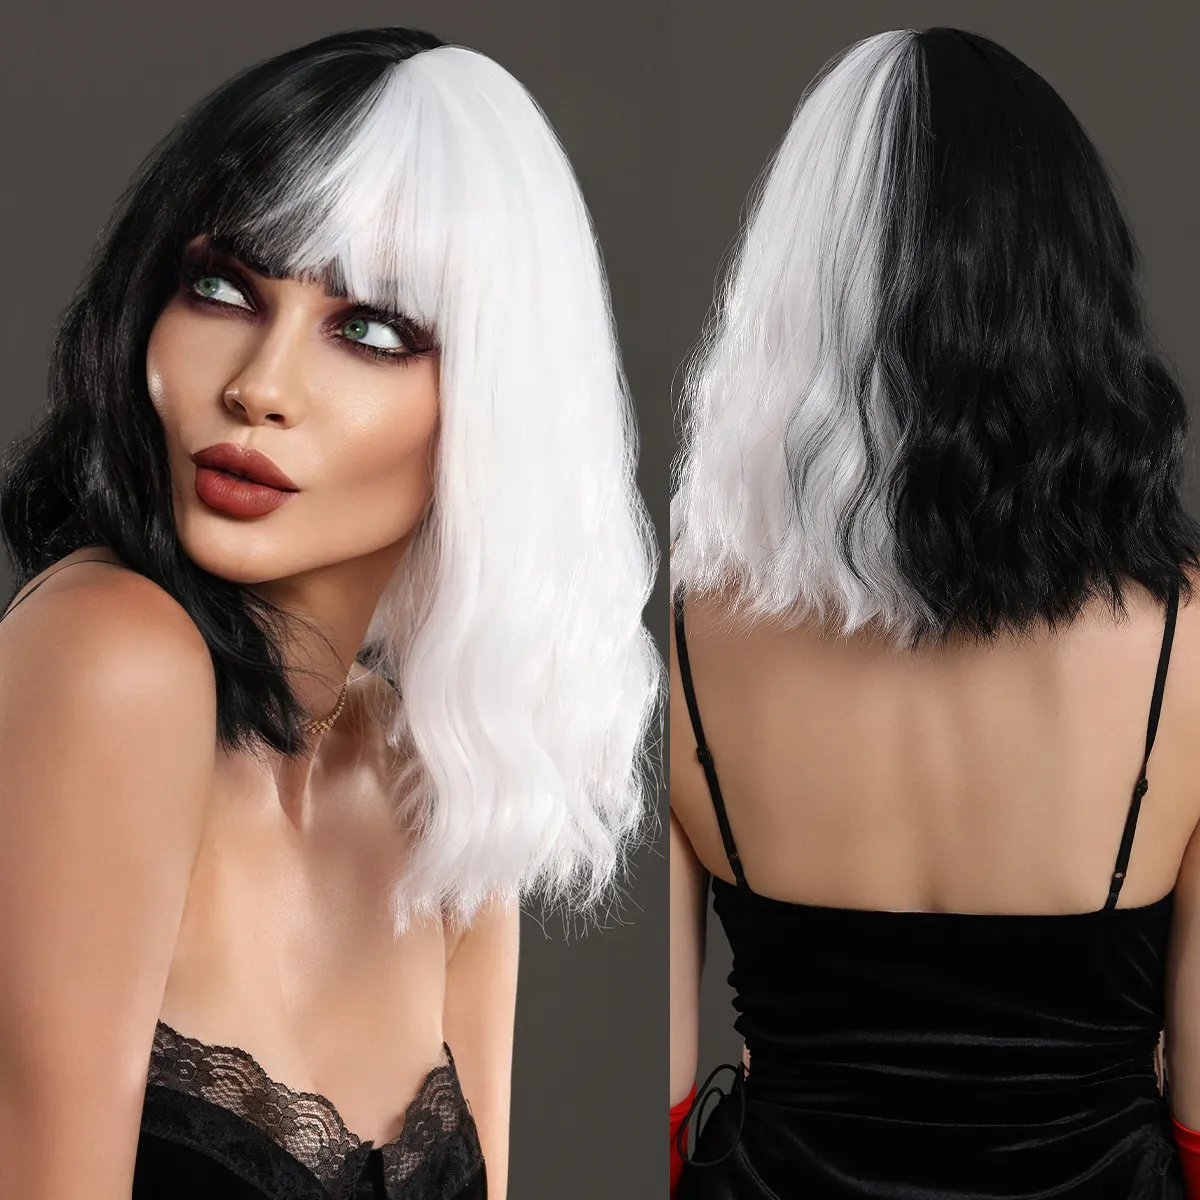 Black And White Wigs For Cruella Deville Wig Costume Women Short Curly Wavy Wigs With Wig Cosplay Cute Synthetic Wigs For Party